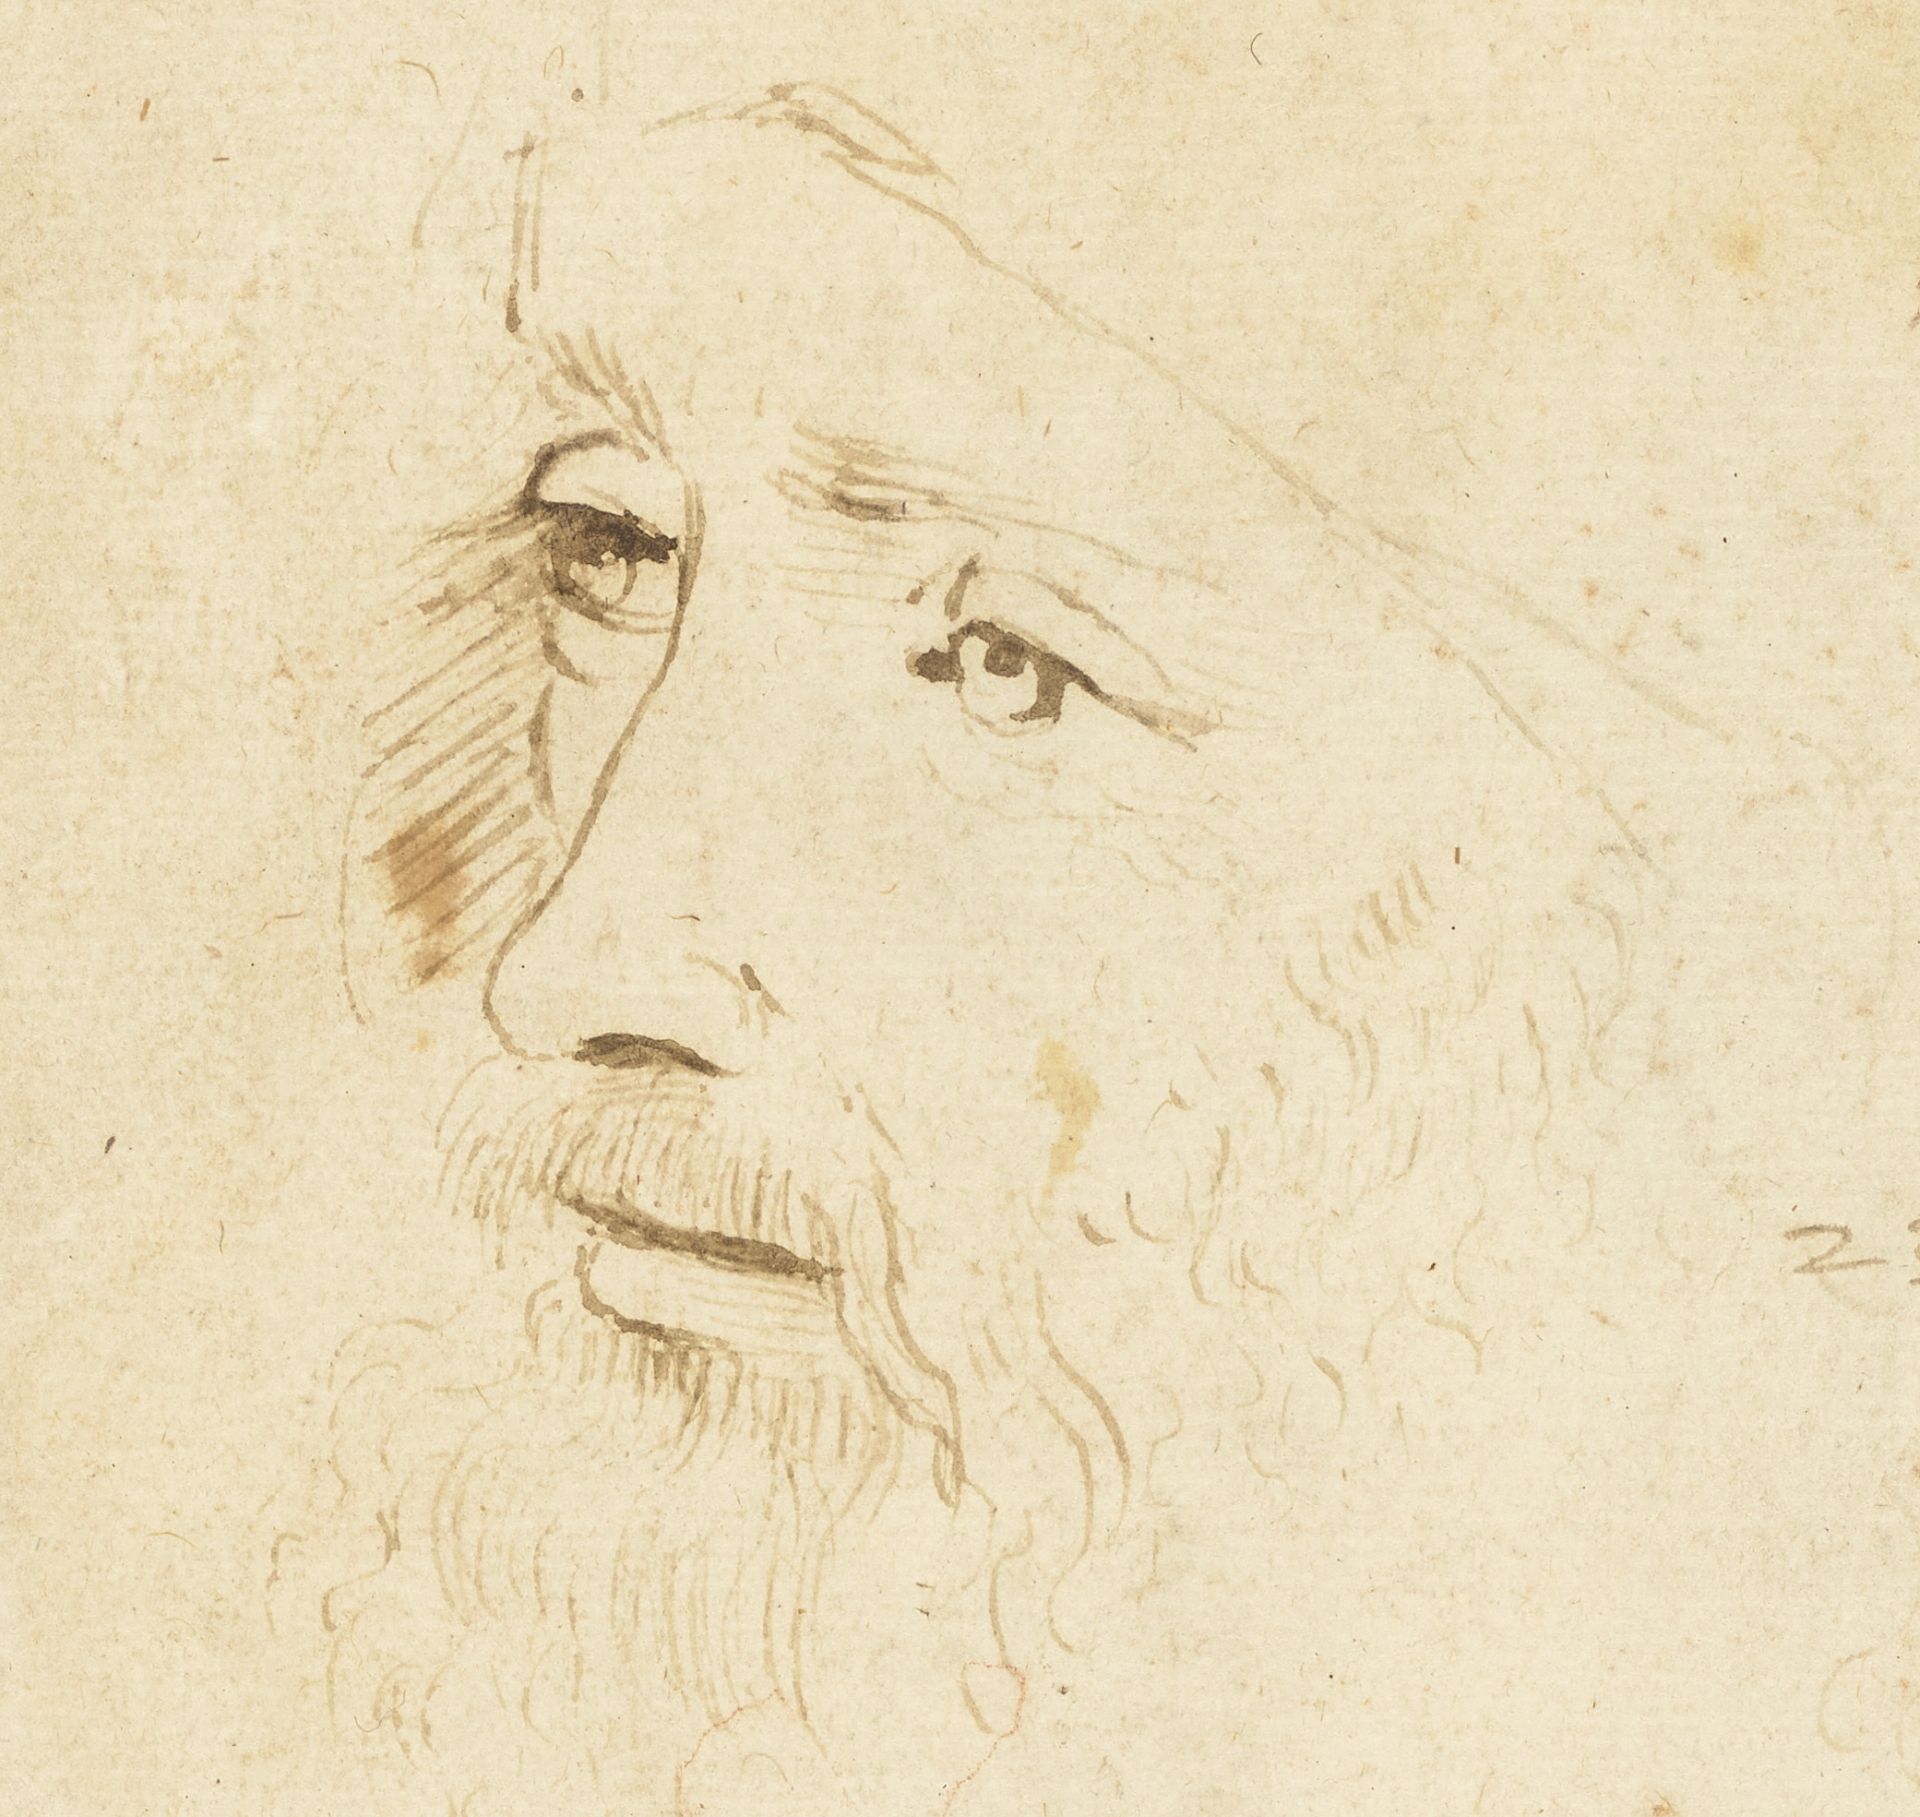 epa07542849 An undated handout photo made available by the Royal Collection Trust / © Her Majesty Queen Elizabeth II 2019 shows A sketch of Leonardo da Vinci, c.1517-18, by an assistant of Leonardo.  EPA/ROYAL COLLECTION TRUST / HANDOUT ONE TIME USE ONLY IN CONNECTION WITH THIS STORY. SHUTTERSTOCK OUT HANDOUT EDITORIAL USE ONLY/NO SALES/NO ARCHIVES